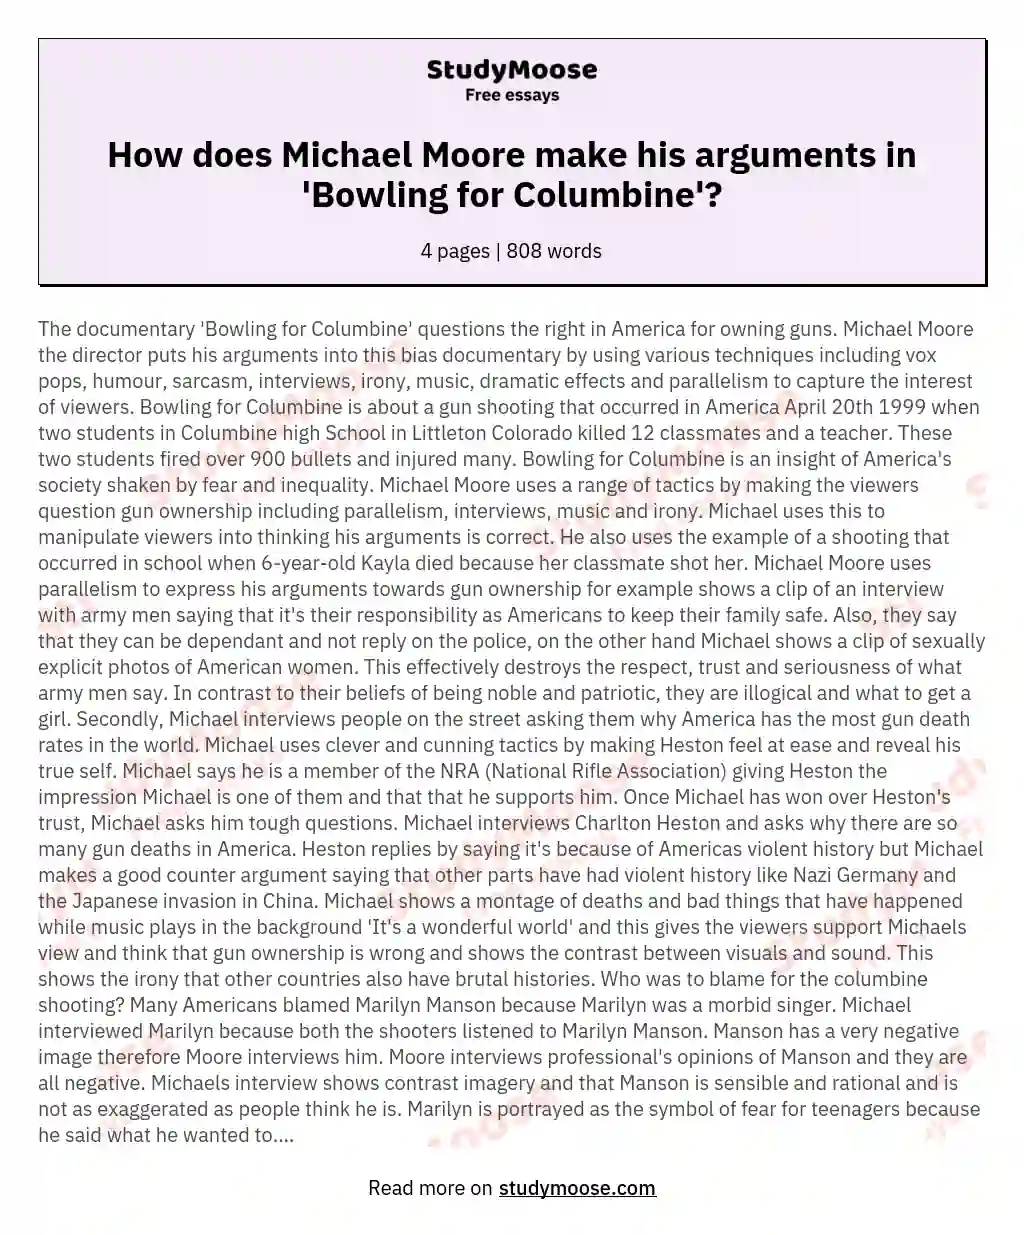 How does Michael Moore make his arguments in 'Bowling for Columbine'? essay